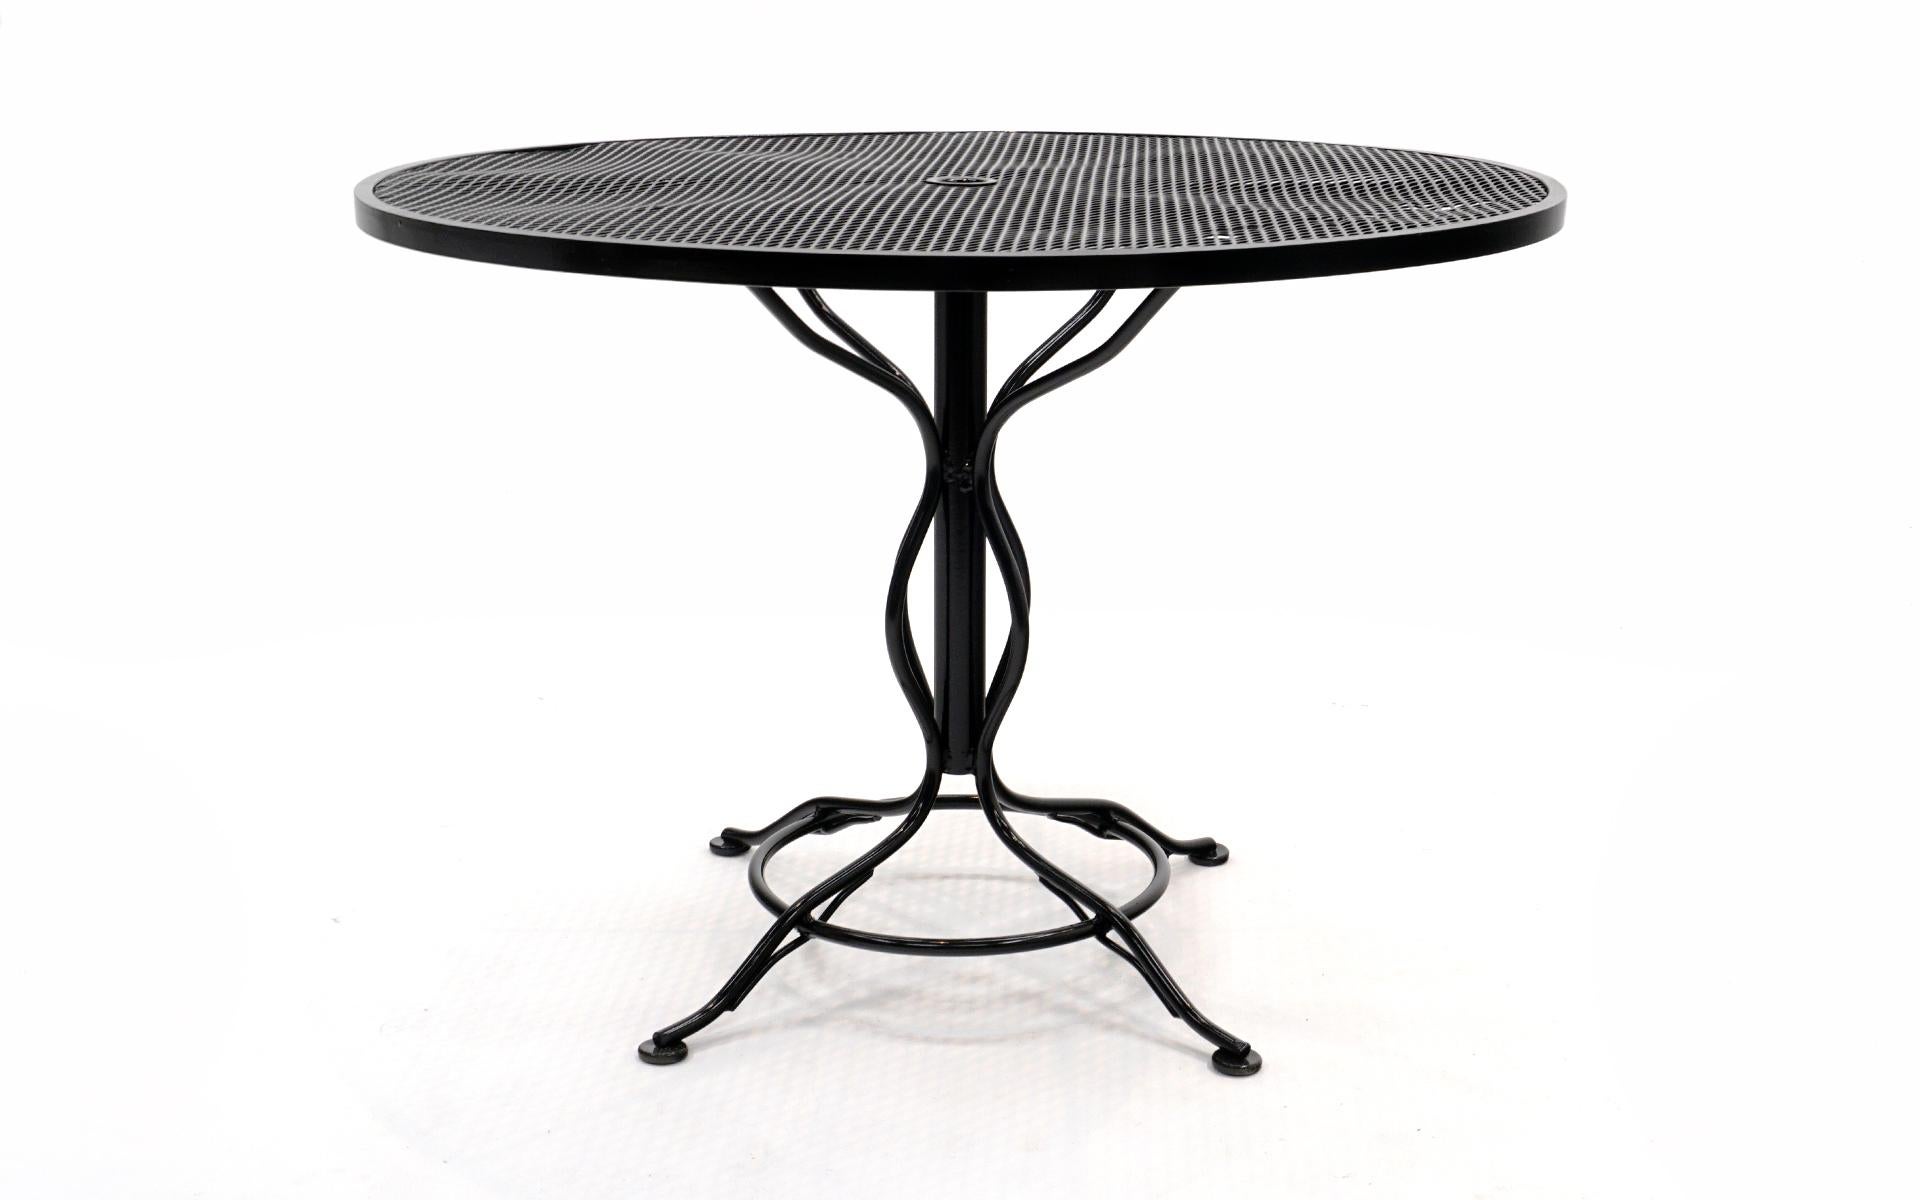 Woodard outdoor dining table professional sand blasted and painted in a black gloss automotive finish. More durable than powder coating. Beautiful detailing on the legs. Center umbrella opening.